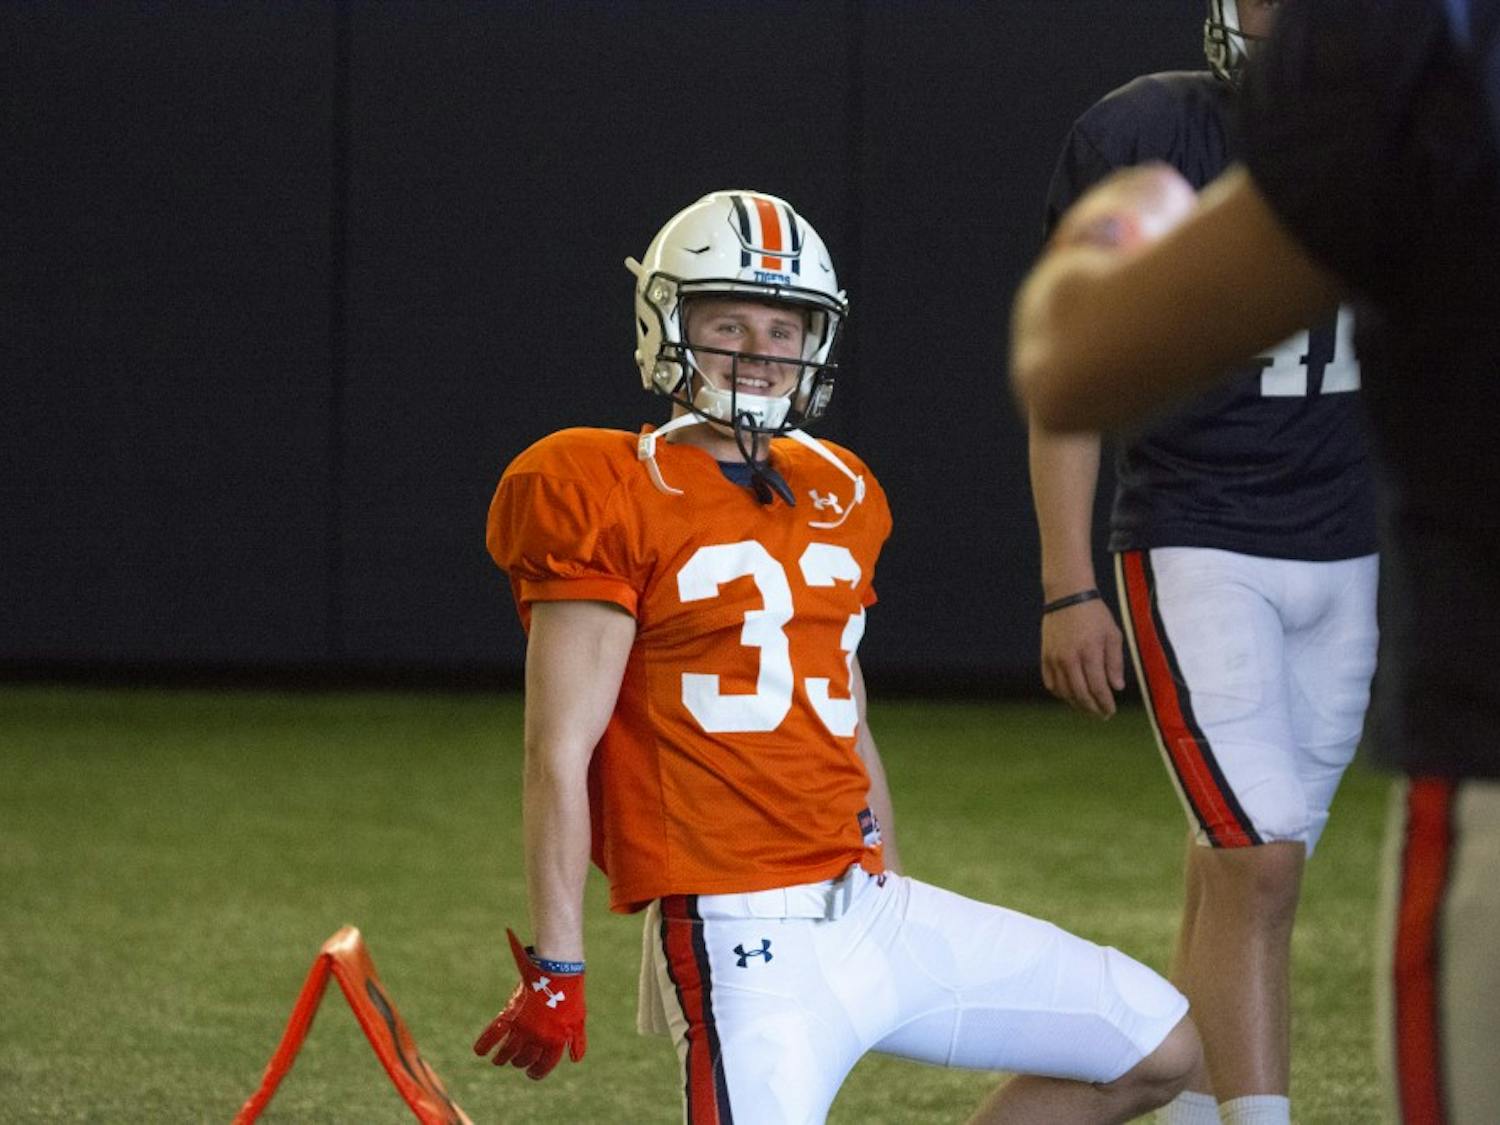 Auburn Tiger wide receiver Will Hastings (33)&nbsp;at Auburn's spring practice on March 6, 2018, in Auburn, Ala.